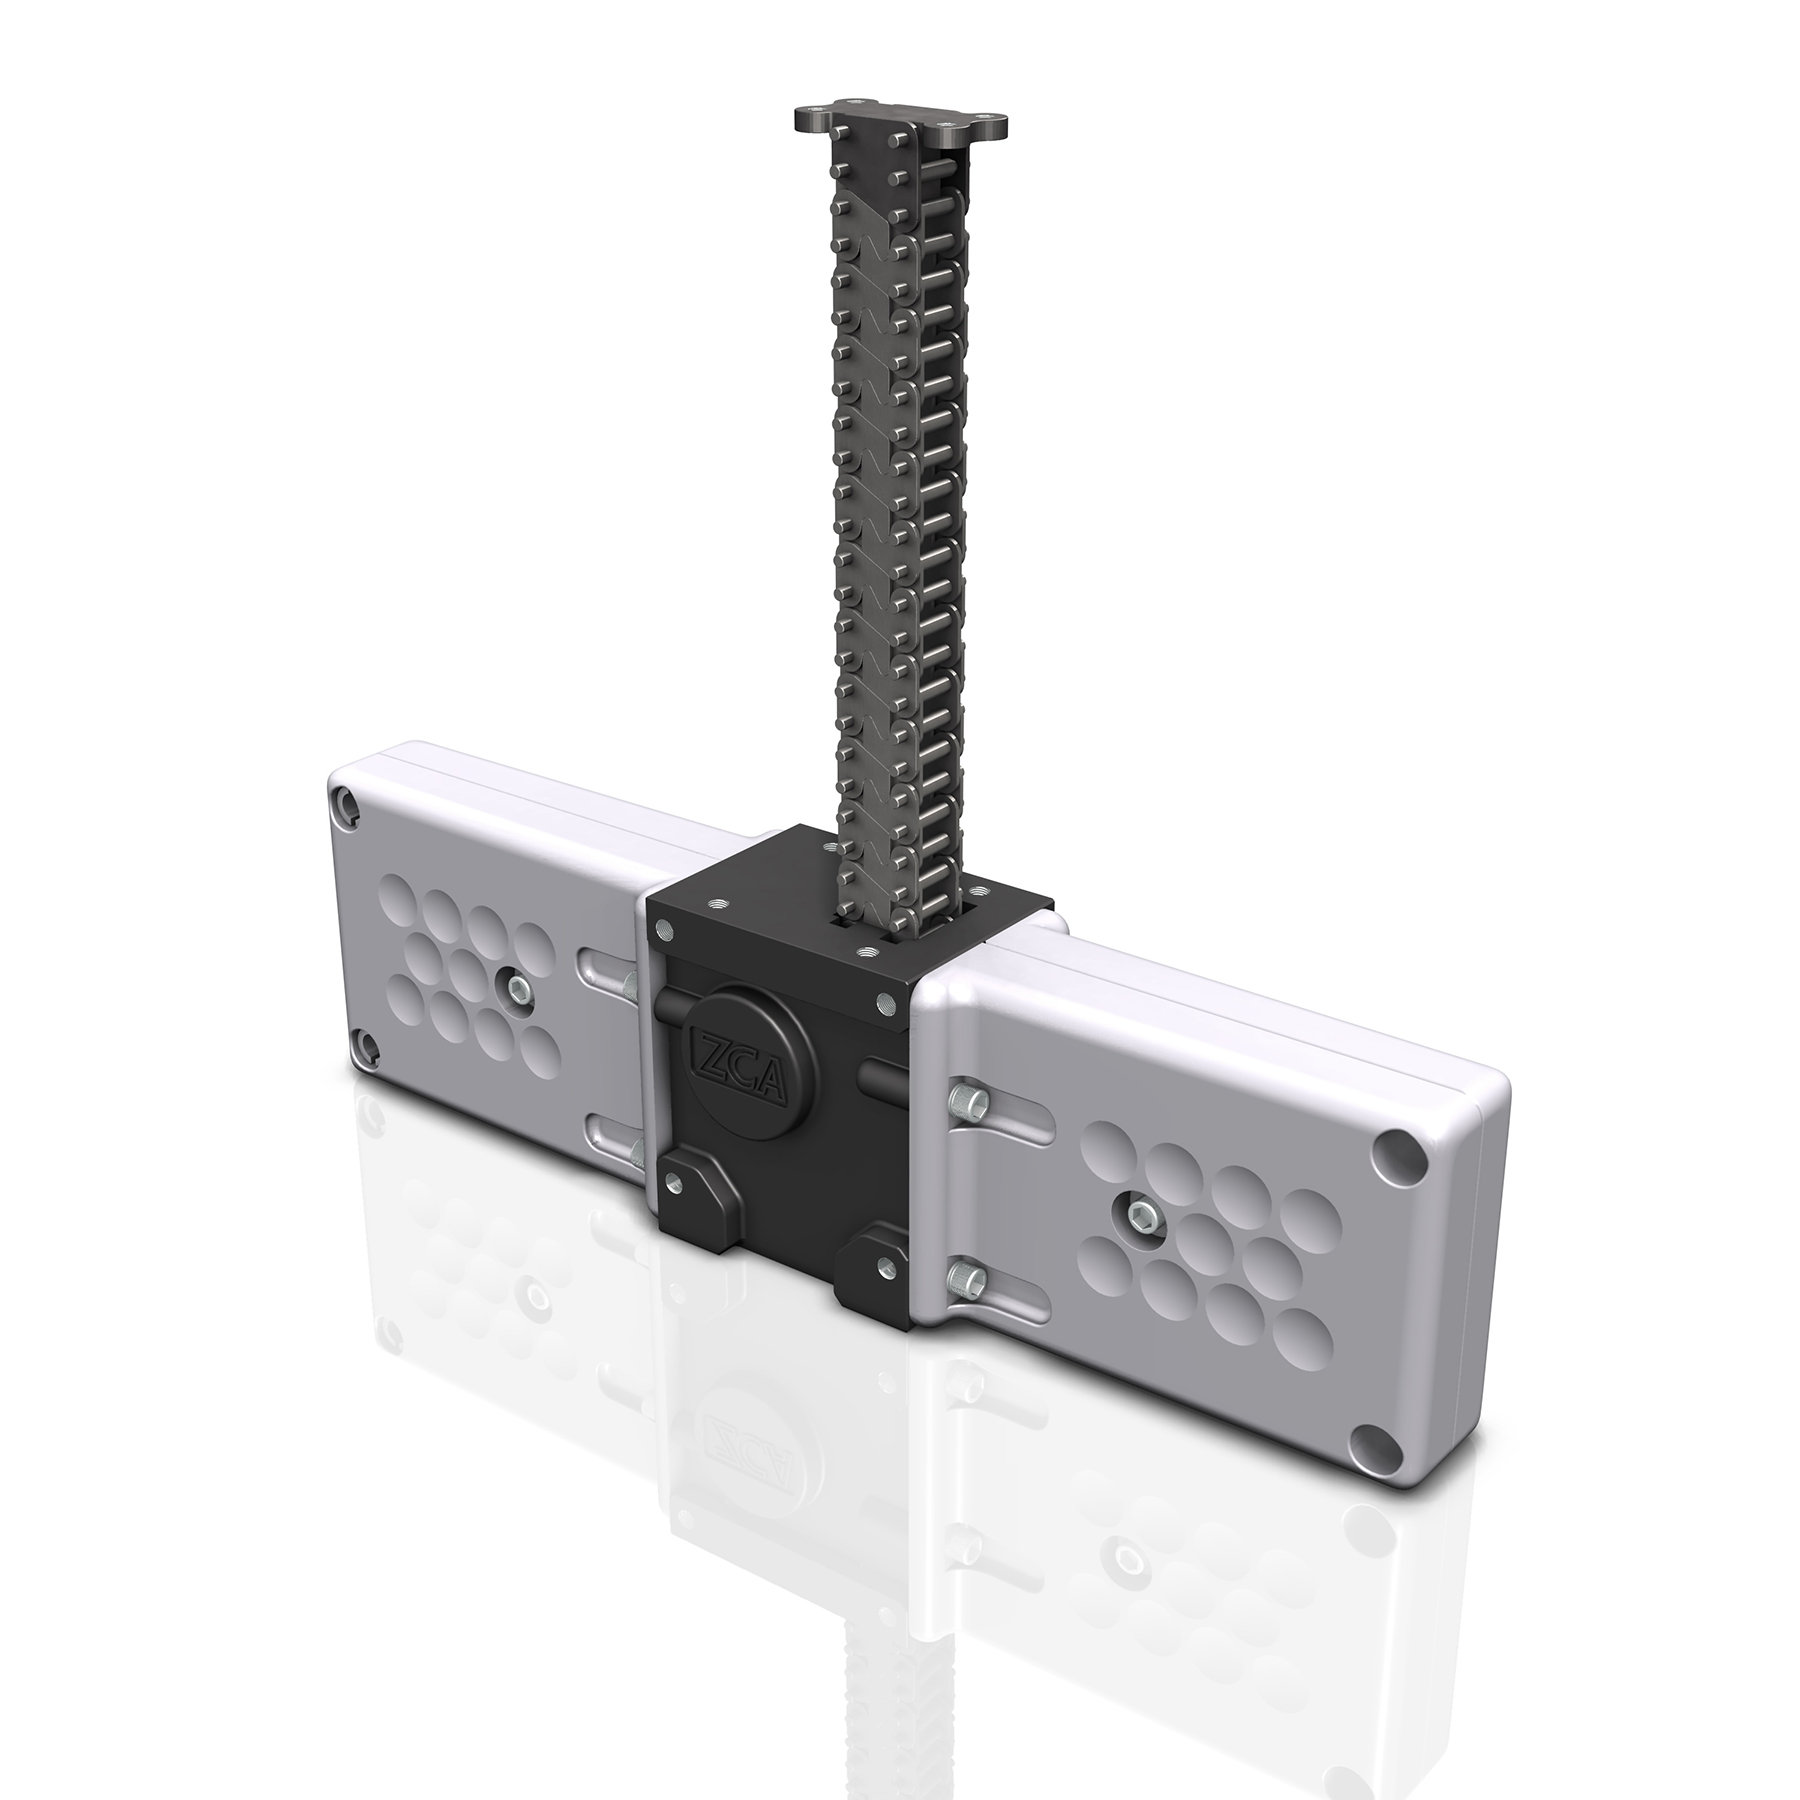 Tsubaki Zip Chain Actuators can carry out multi-point stopping with high precision.